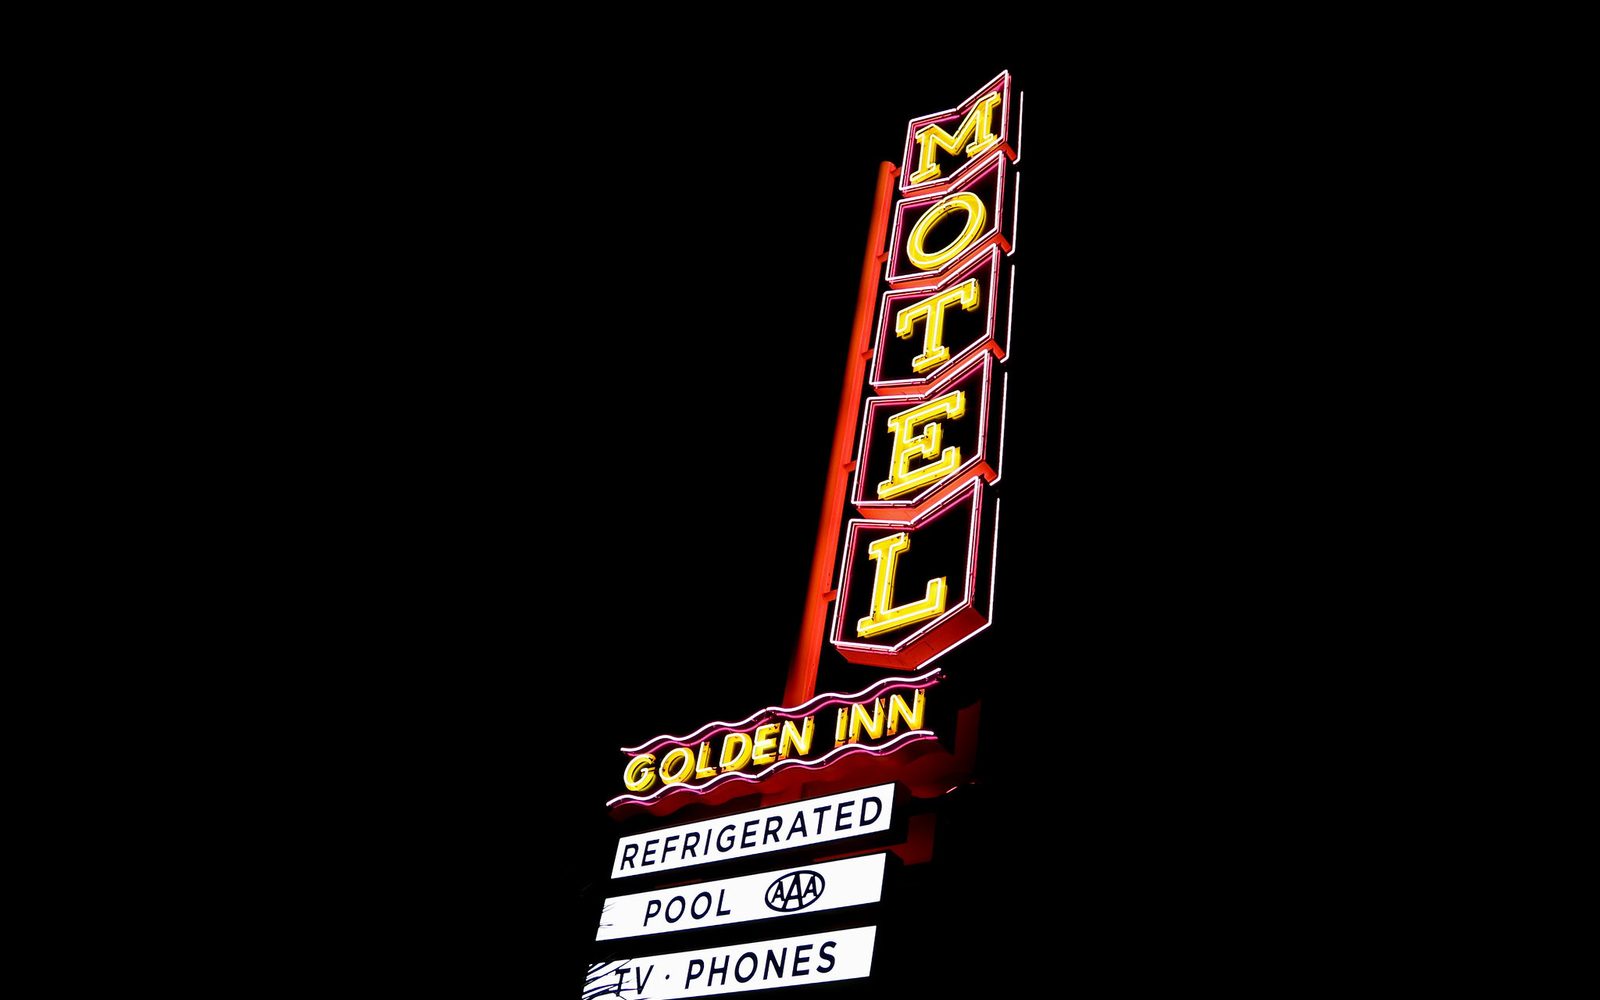 Golden Inn Motel - part of the Las Vegas Scenic Byway project